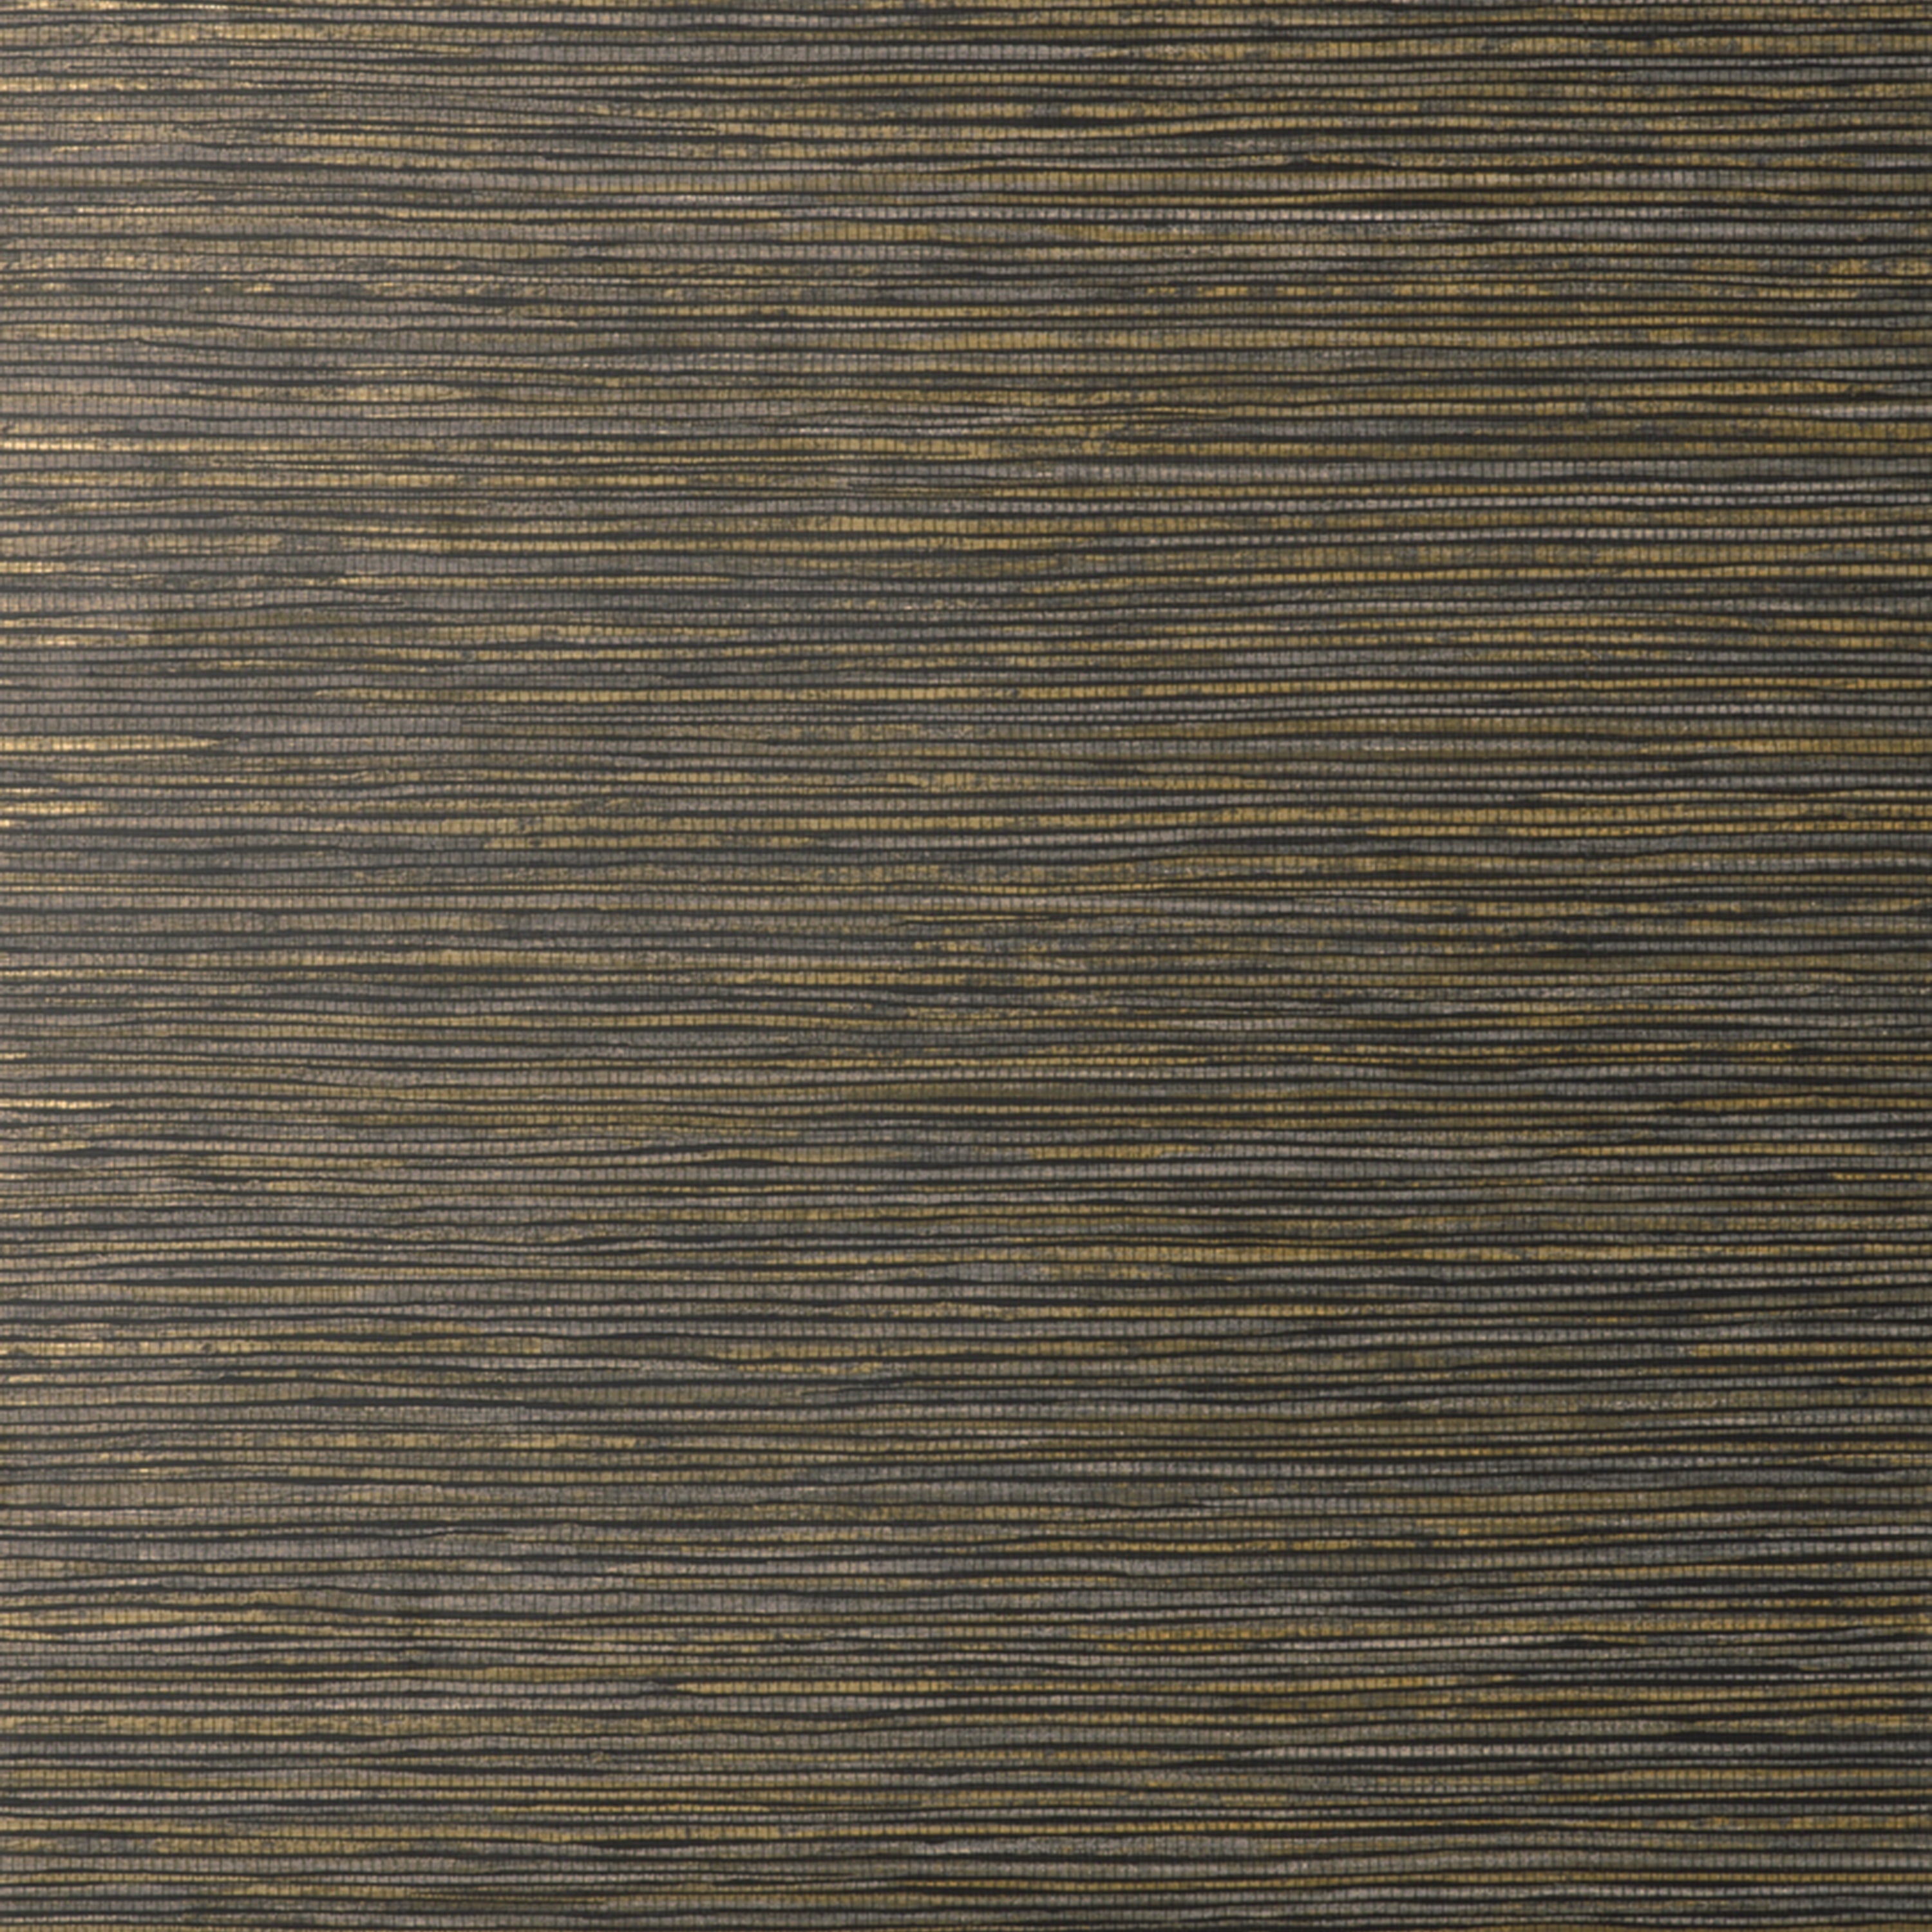 Fusion Plain Charcoal Wallpaper | Seagrass Fabric Effect | M1770